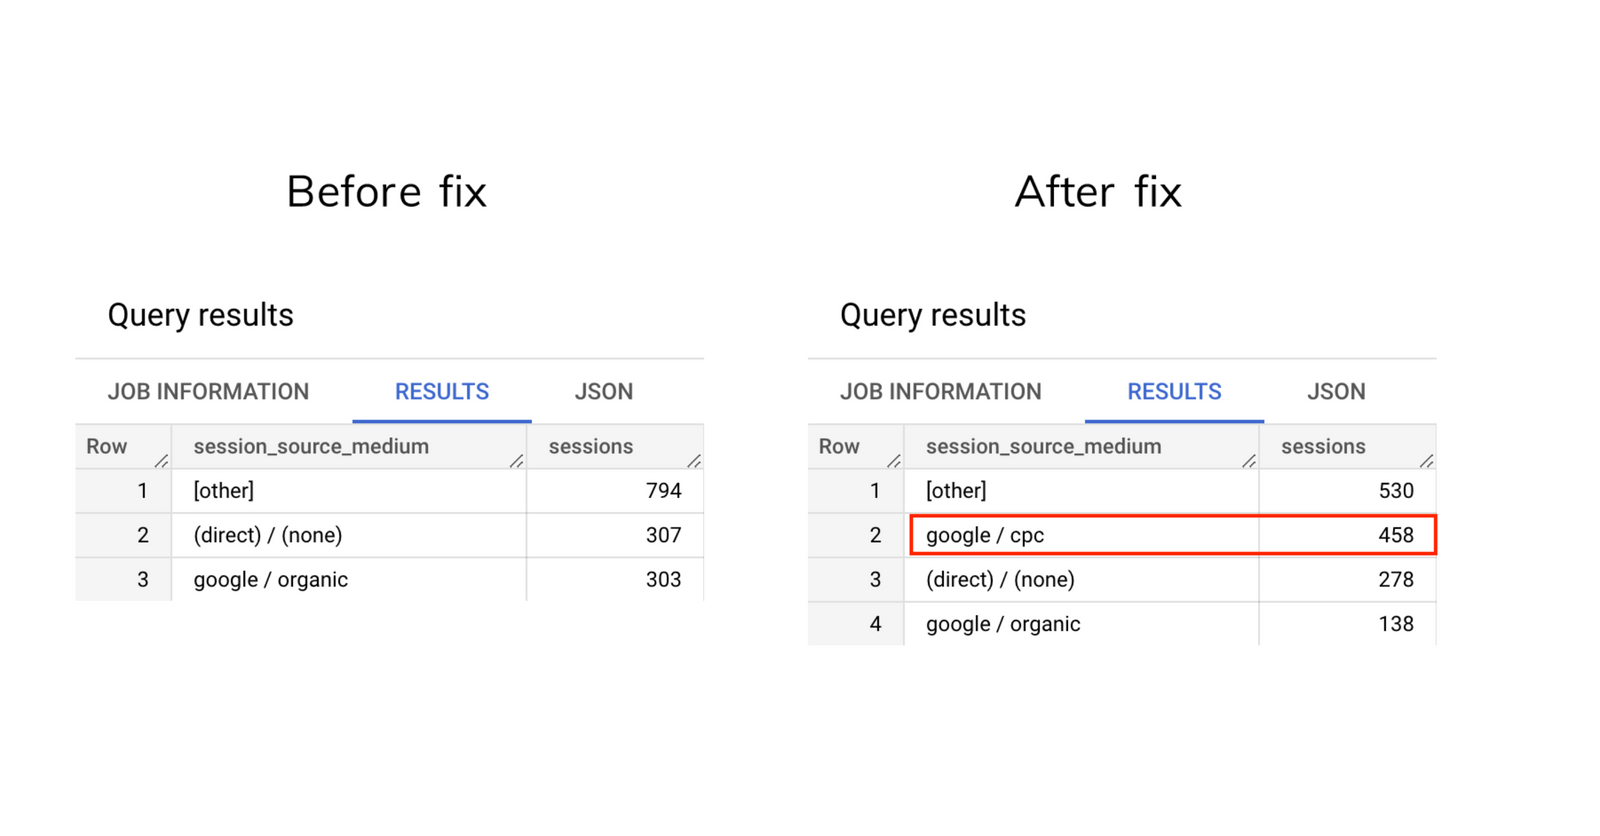 How to fix the major GA4 BigQuery export misattribution (part 1: overwrite source, medium & campaign when 'gclid' parameter is available)